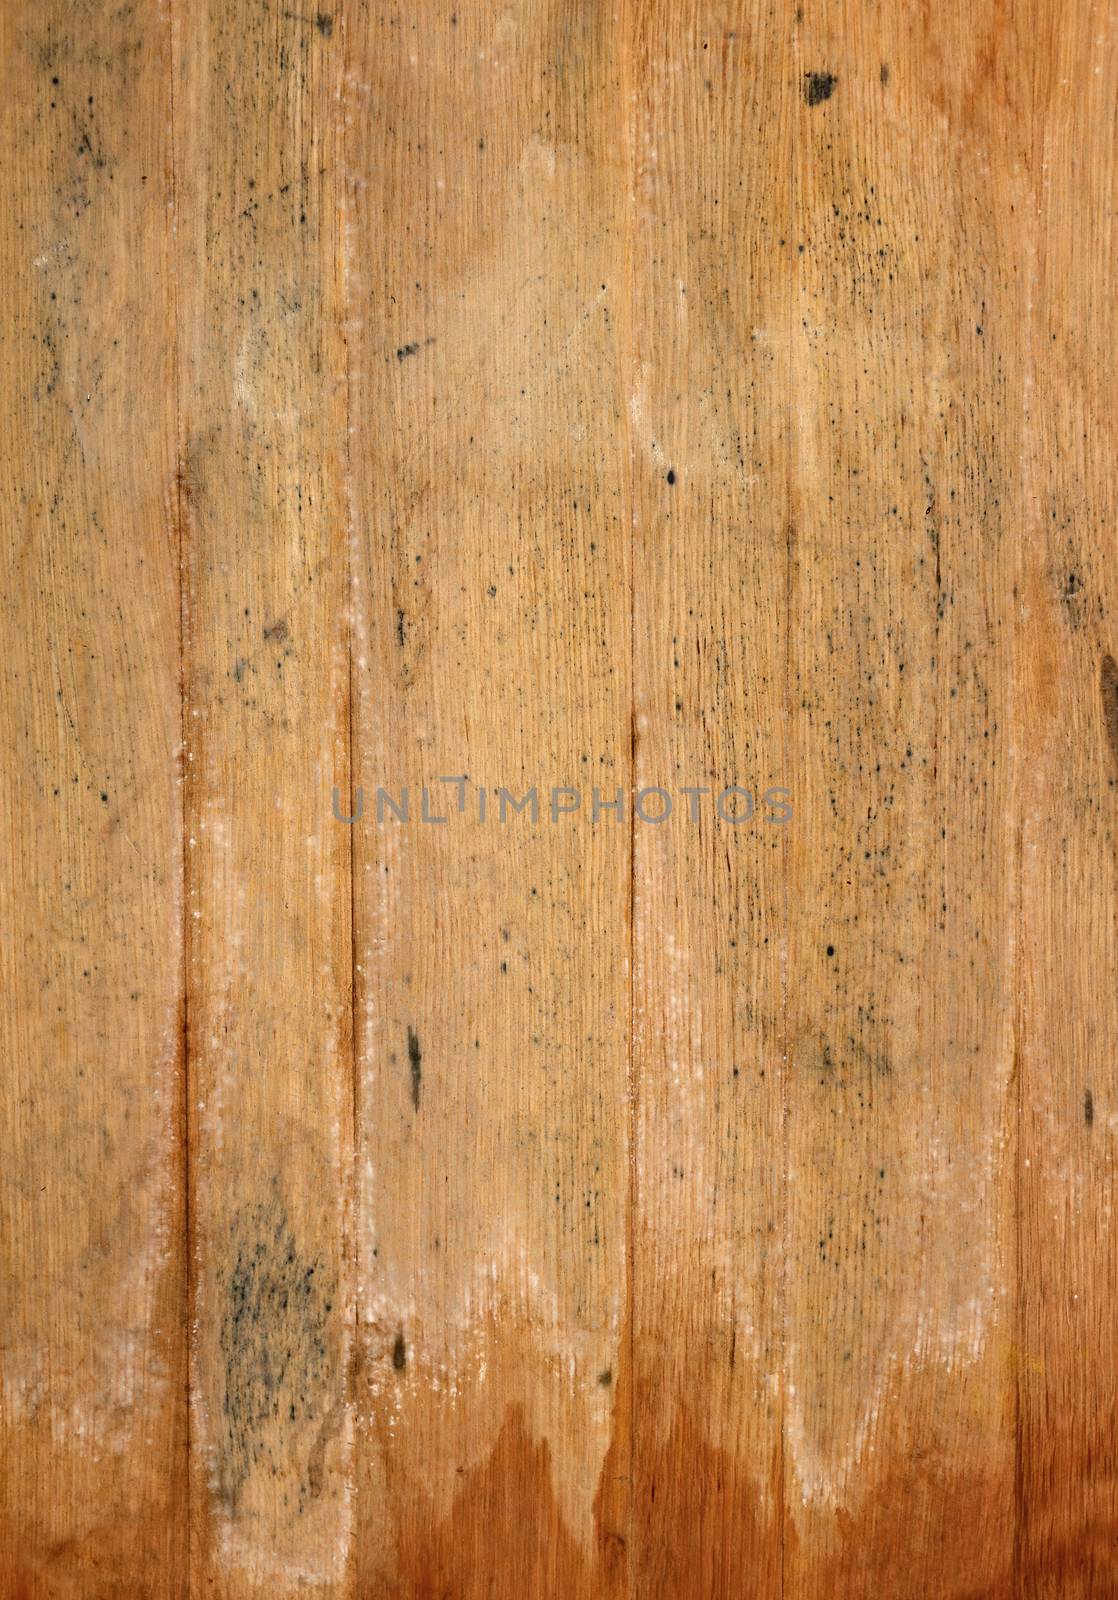 Vintage brown barrel wooden vertical planks background texture with scratches and black stains over wood grain of old aged oak barrel bottom, close up